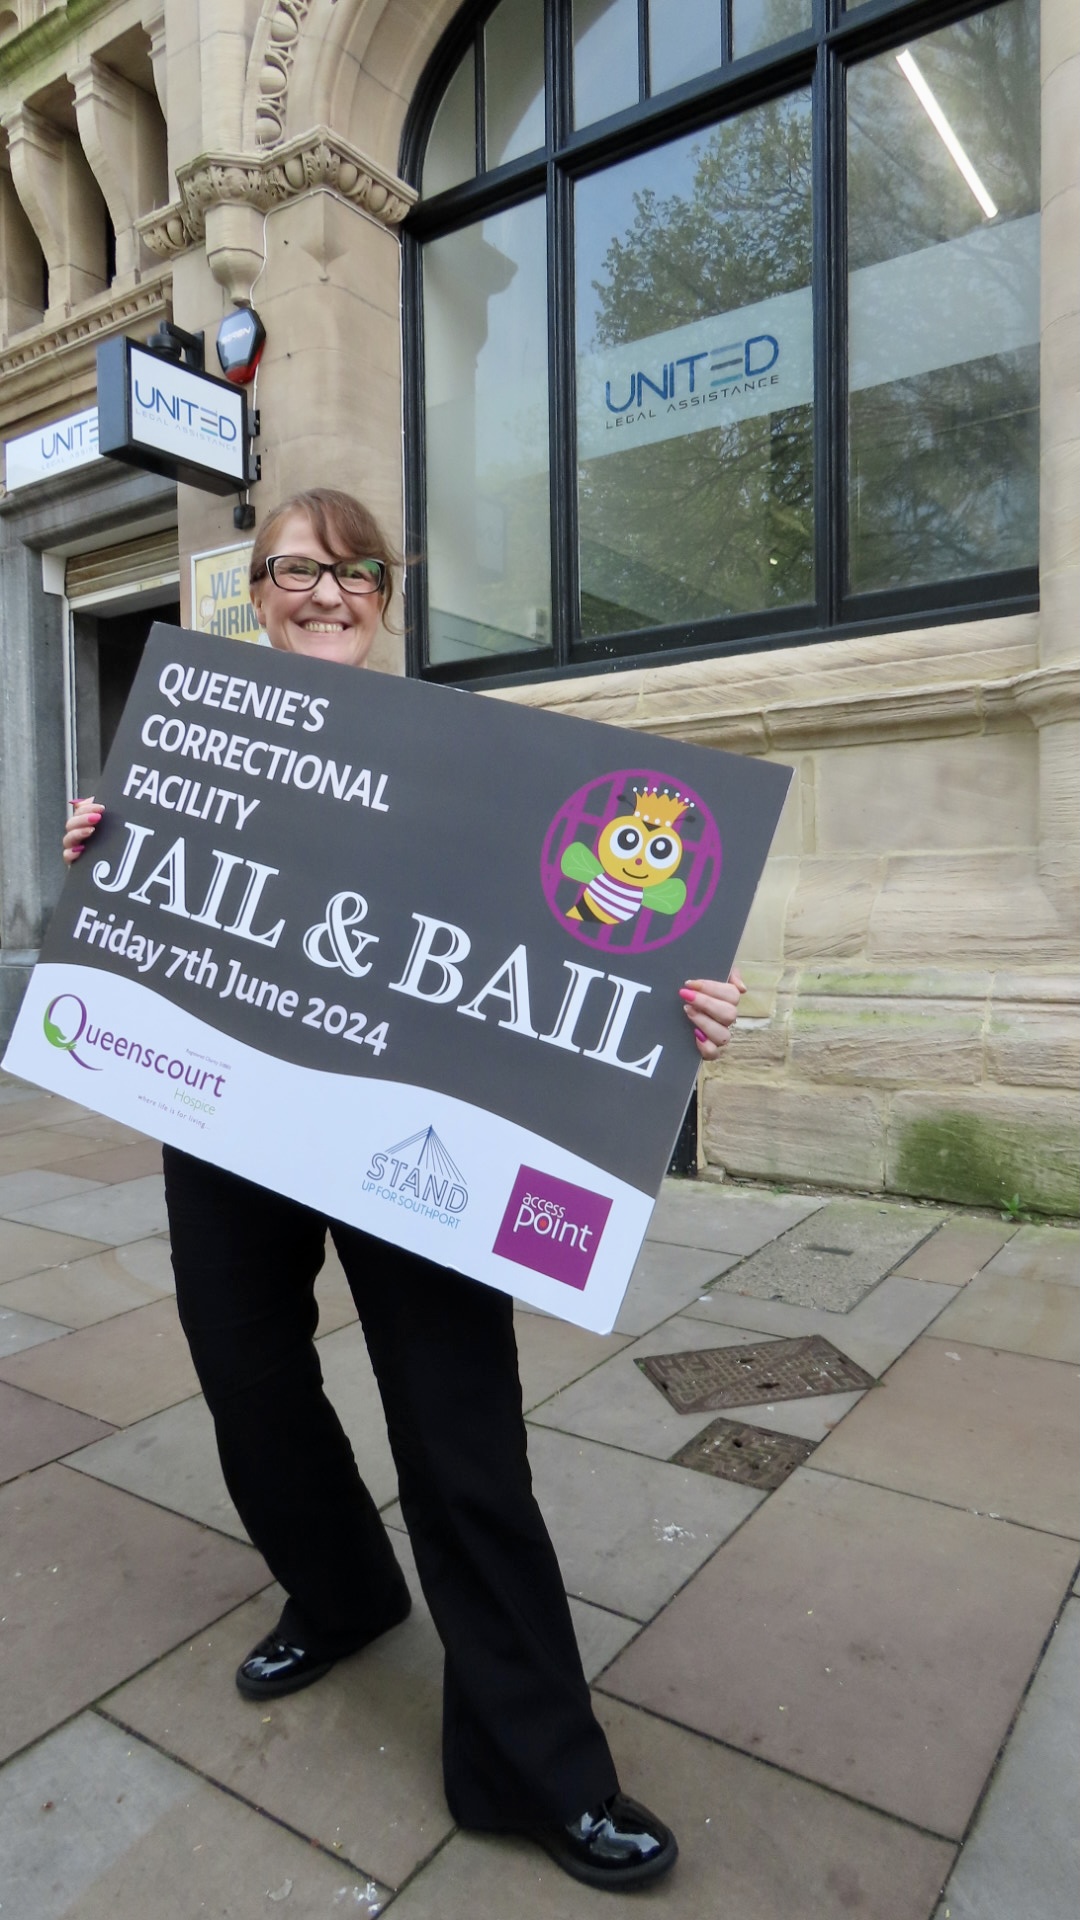 Jocelyn Pye, a Motor Claims Handler at United Legal Assistance in Southport, is taking part in the Jail and Bail fundraiser for Queenscourt Hospice. 